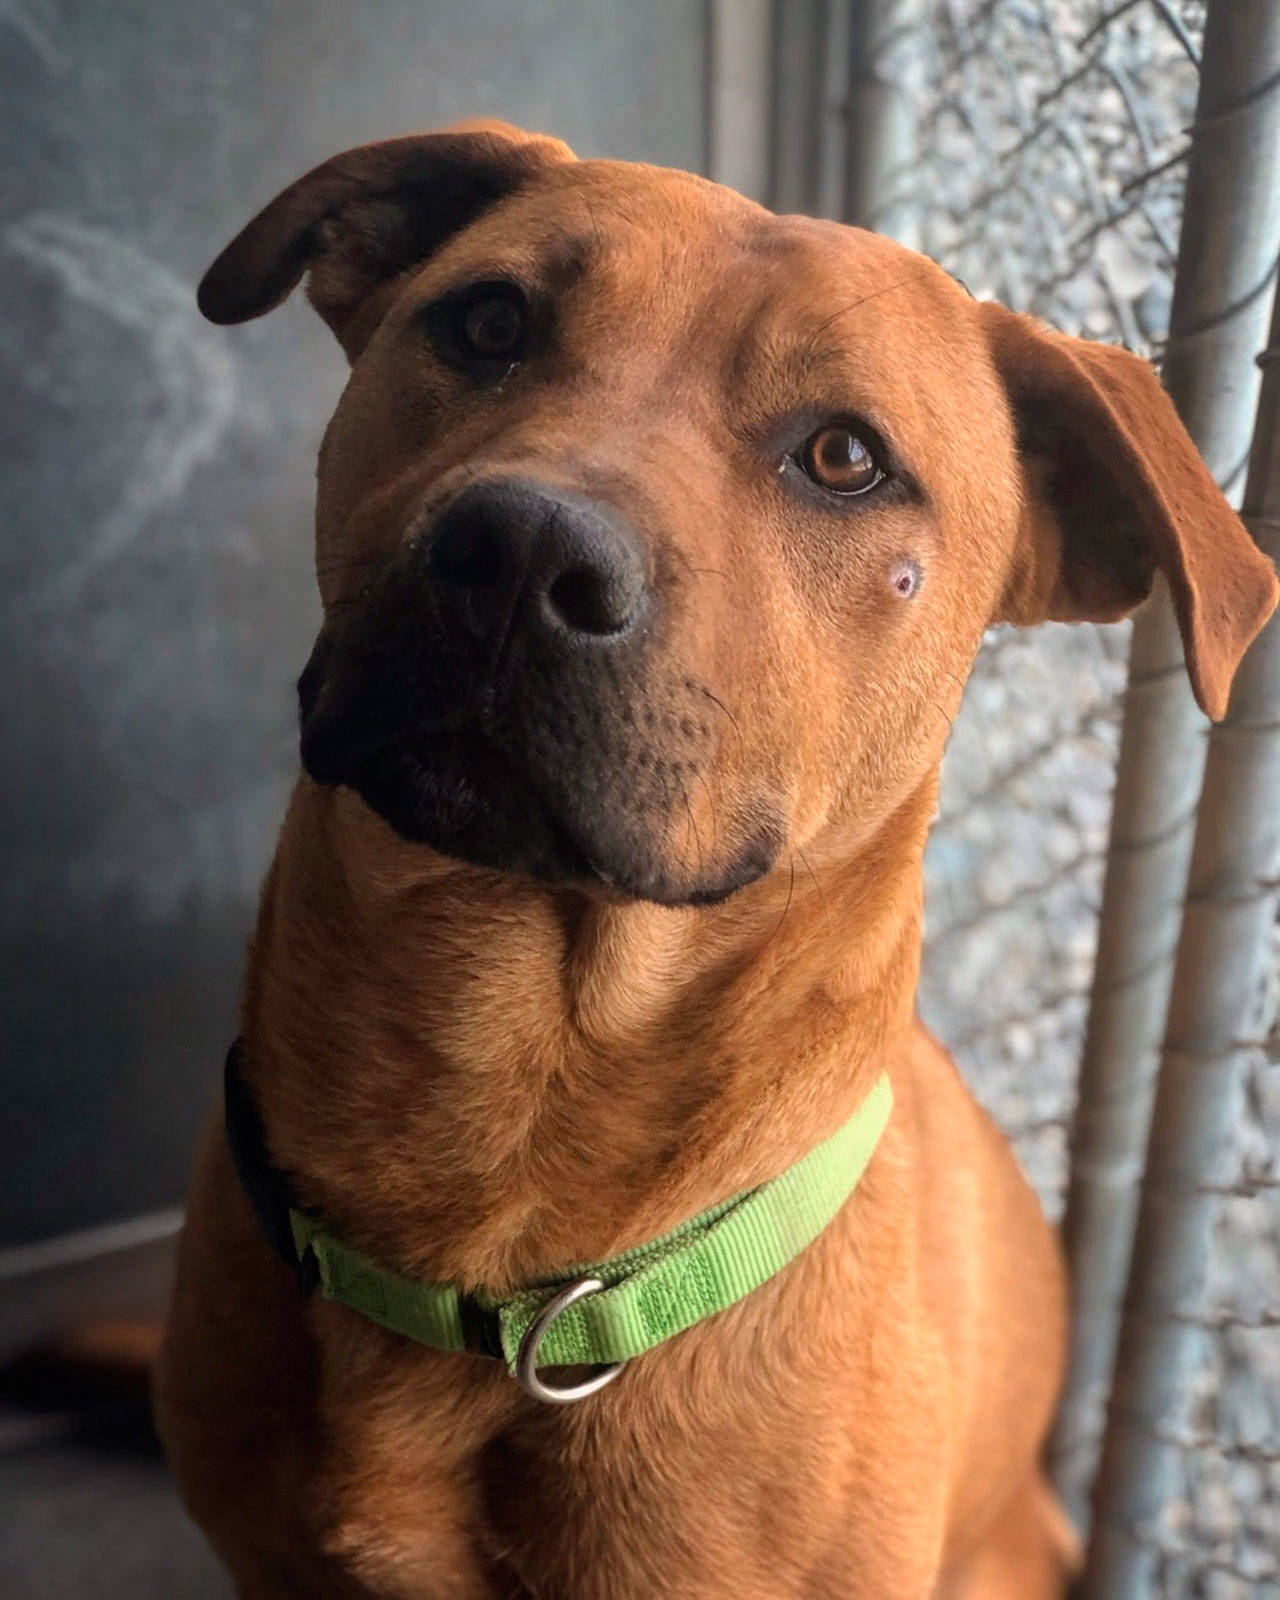 Graze, an 18-month-old male German Shepherd mix and former Olympic Peninsula Humane Society guest, has recovered from a gunshot wound to the face and was adopted to a new home. (Olympic Peninsula Humane Society)